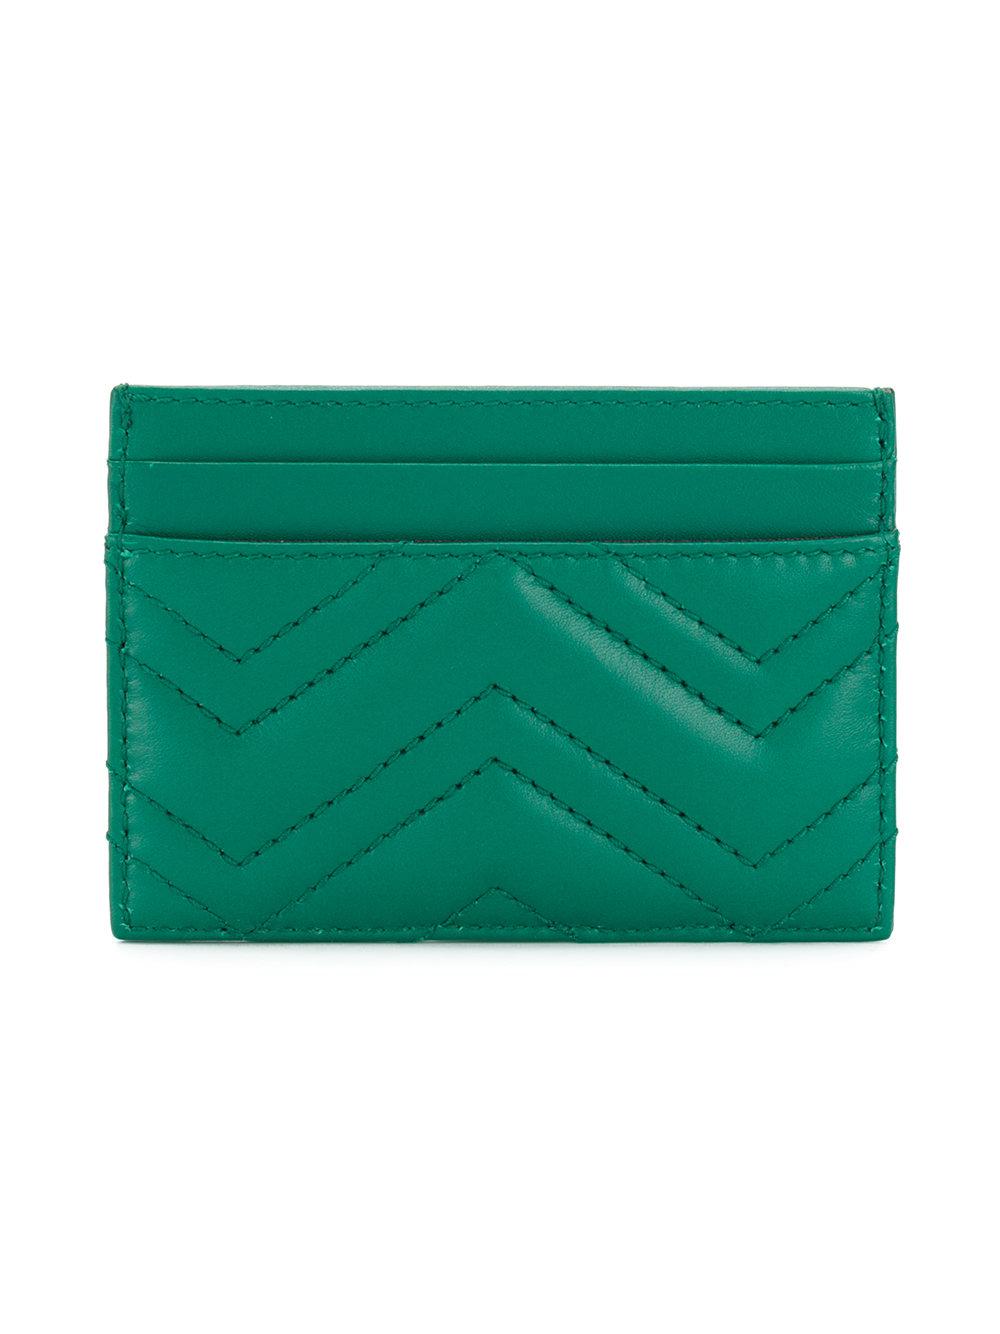 Gucci GG Marmont Matelassé Keychain Wallet in Green